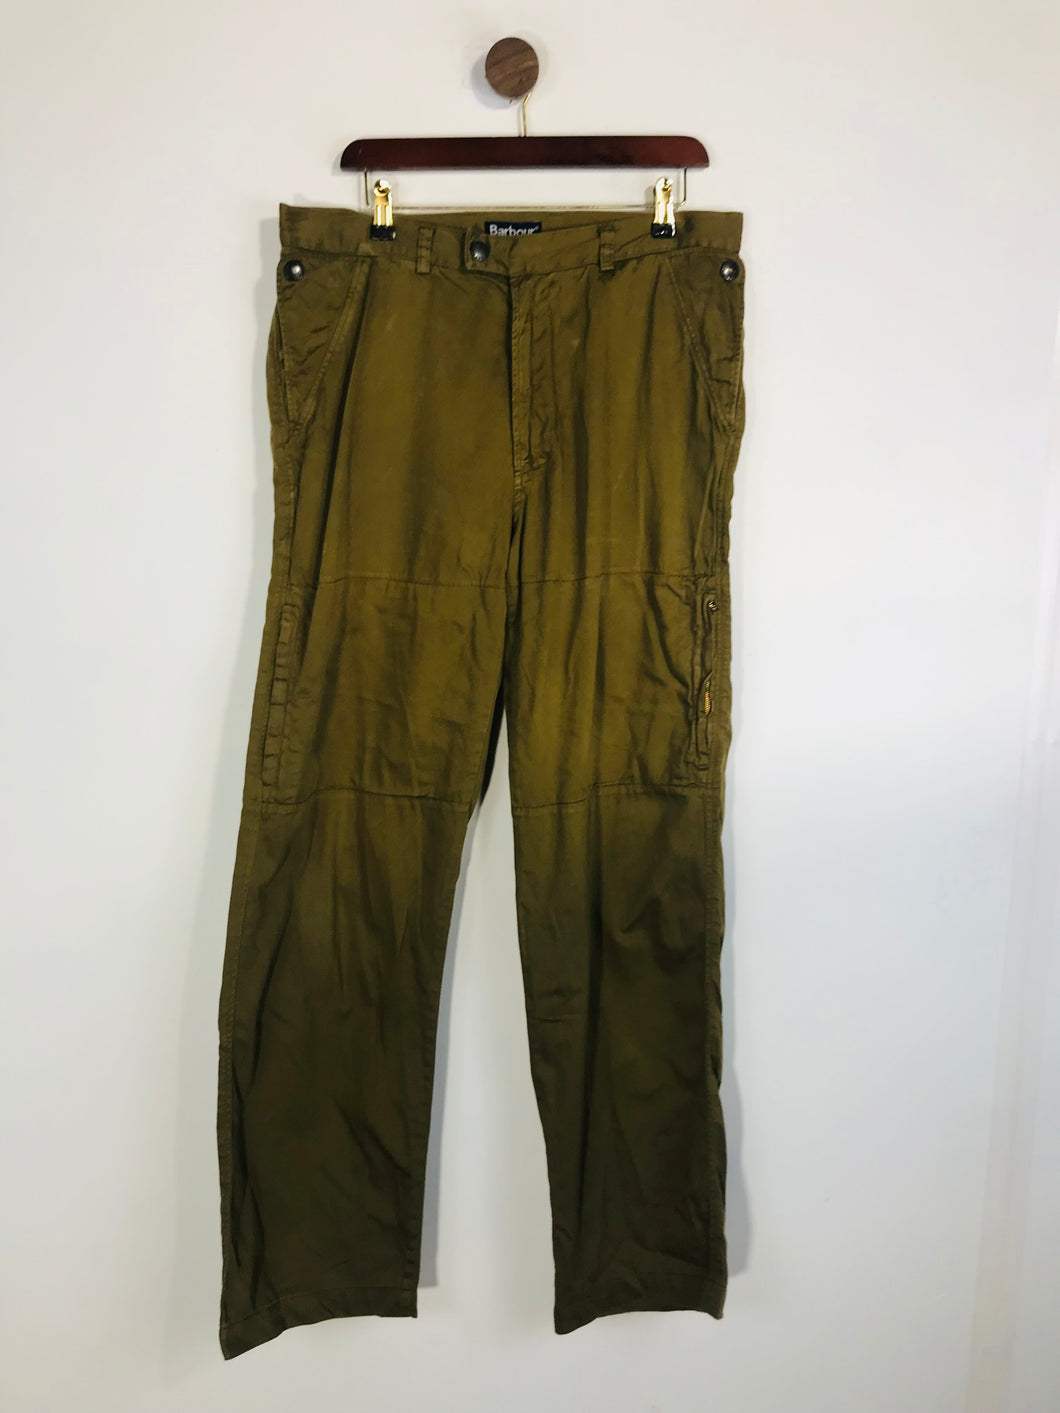 Barbour Men's Cargo Style Chinos Trousers | 36 | Green